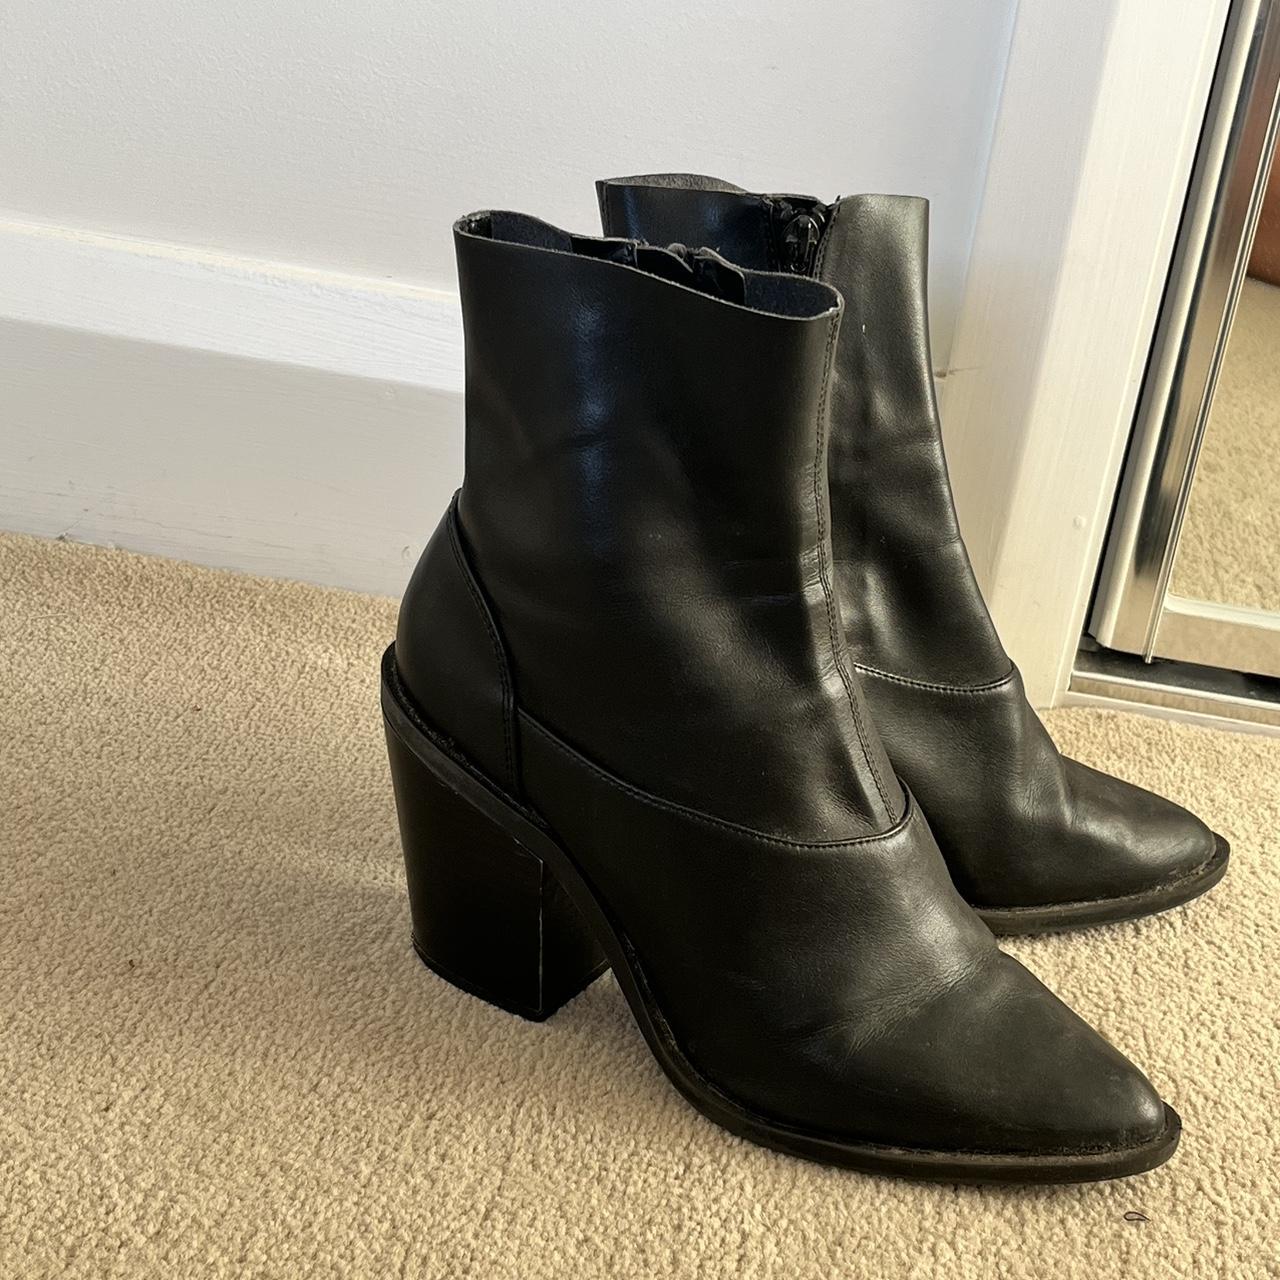 Miss shop heeled boot with zipper pointed toe very... - Depop